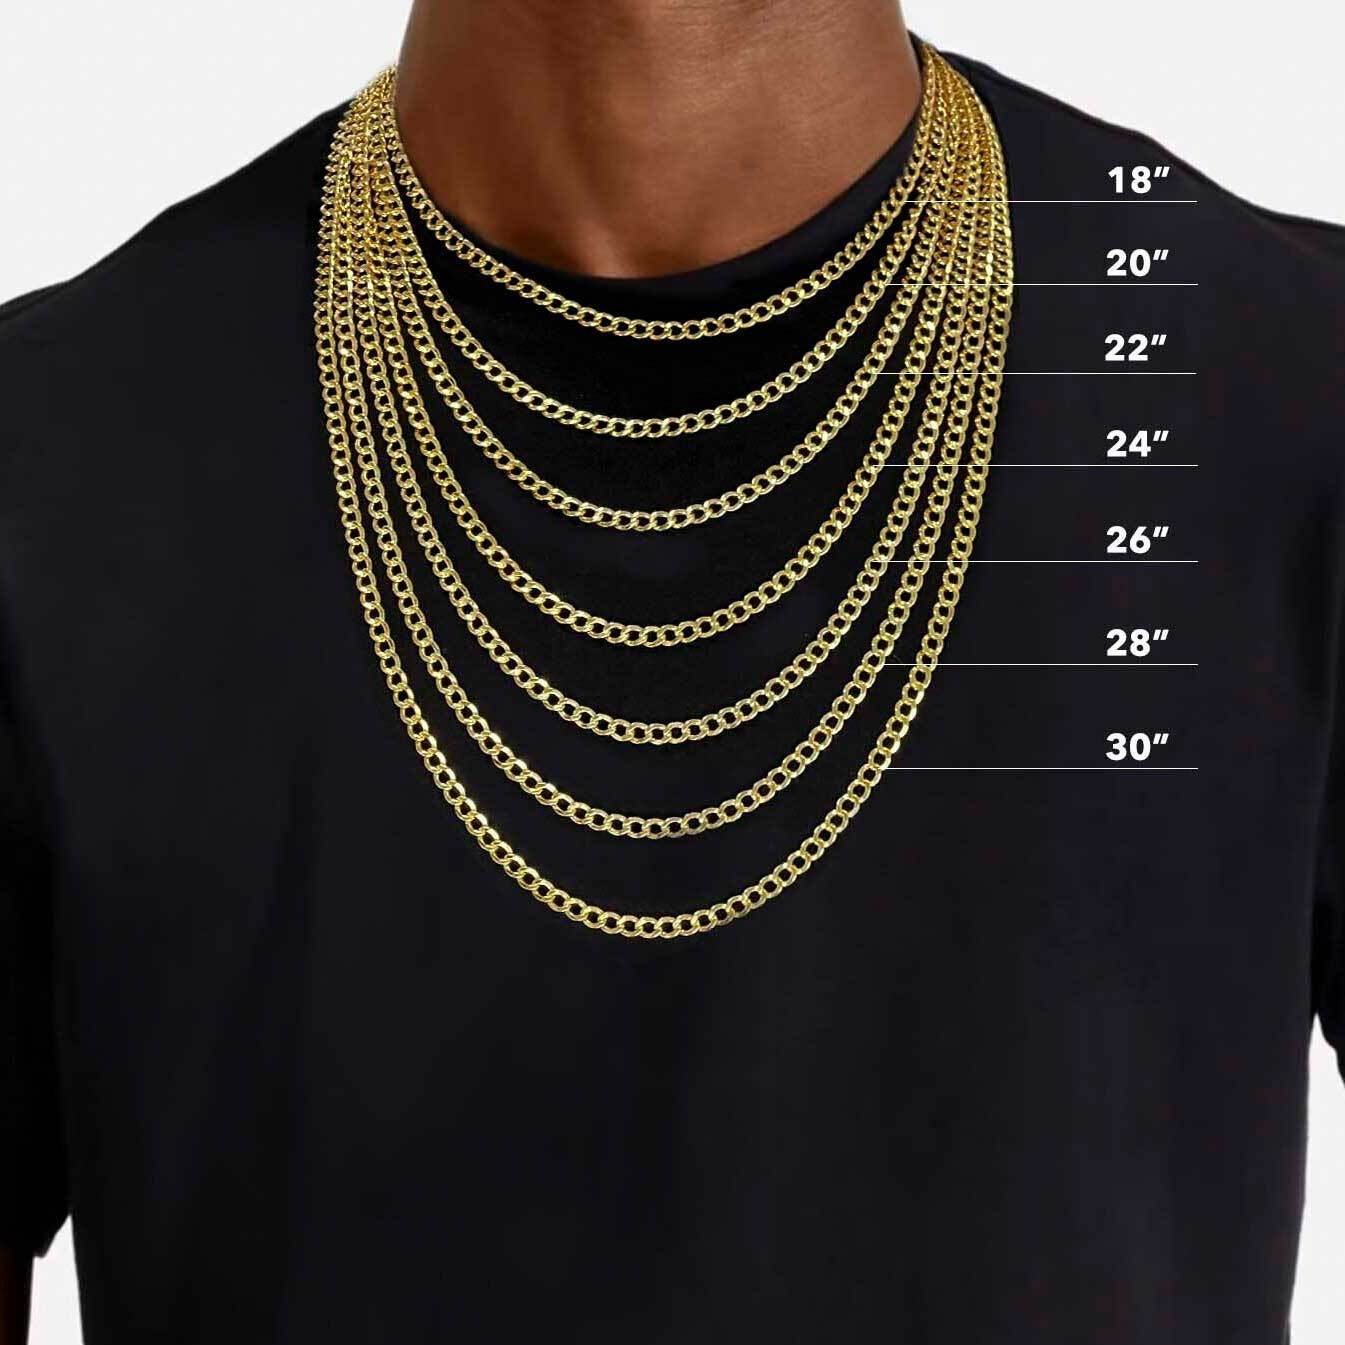 Puffed Gucci Link Chain Necklace 14K Yellow Gold